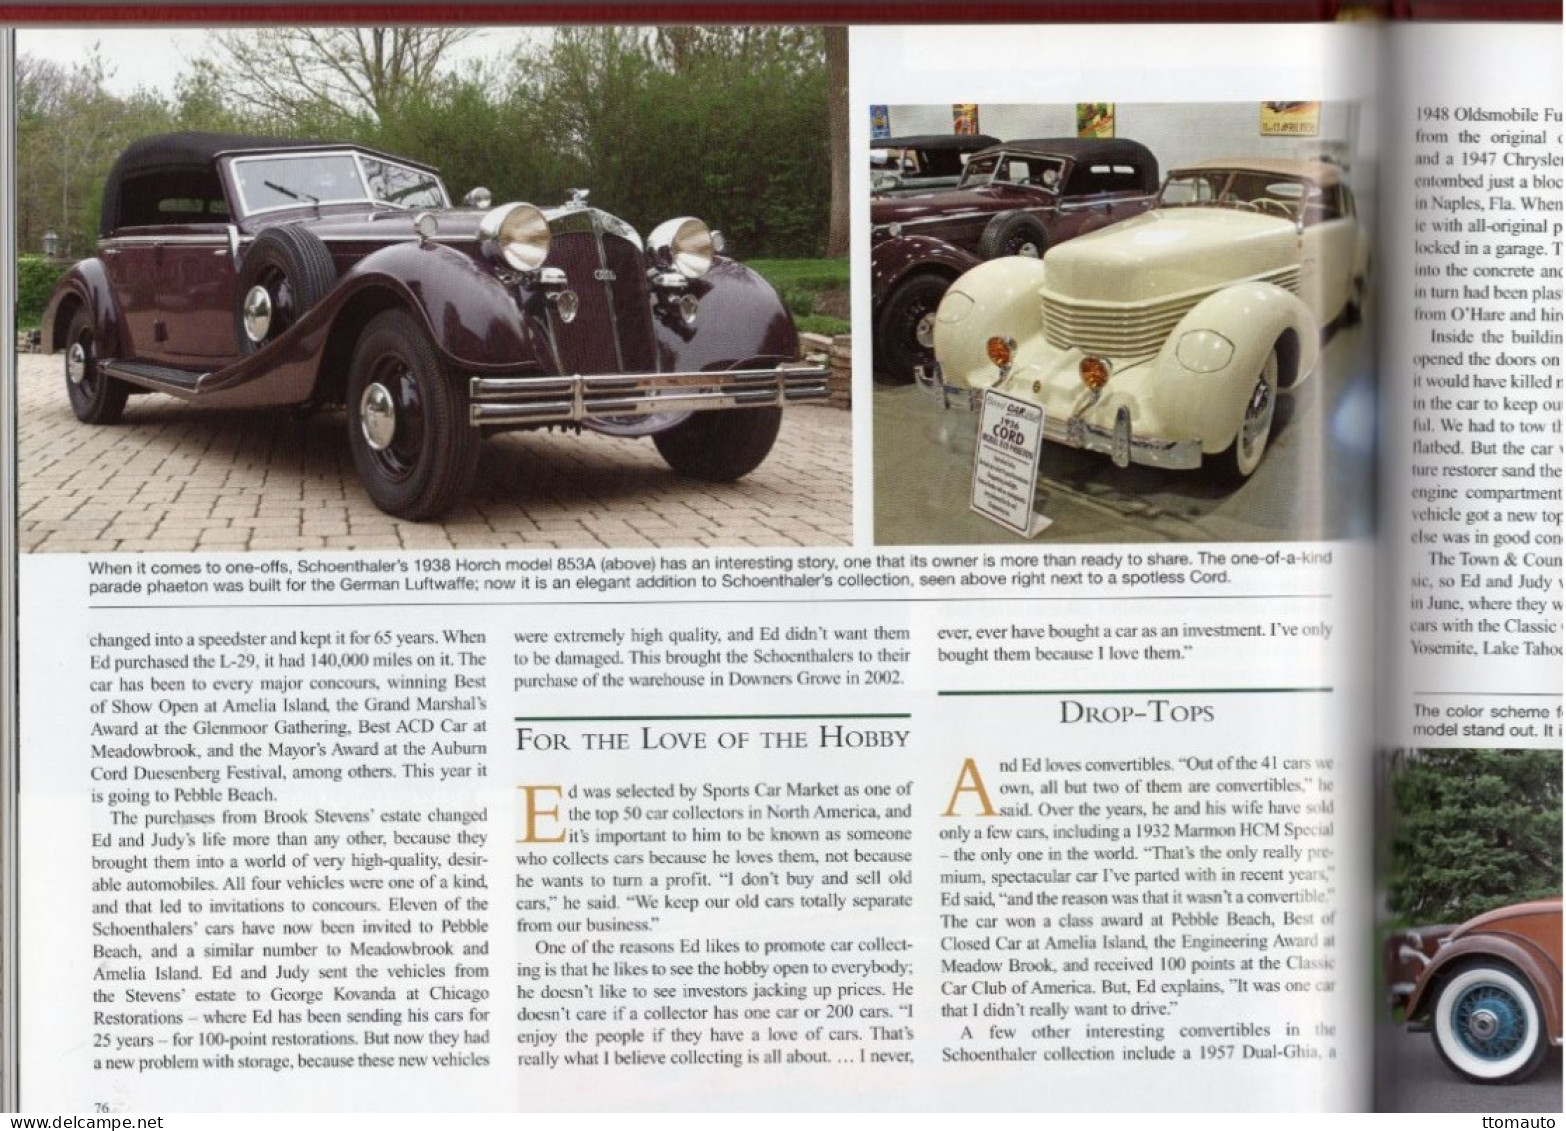 Automobile Quarterly Volume 49 Number 2 (Apr 2009) - Mercedes W165-Hudson-OSCA - FREE SHIPPING TO EUROPE & US - Transports